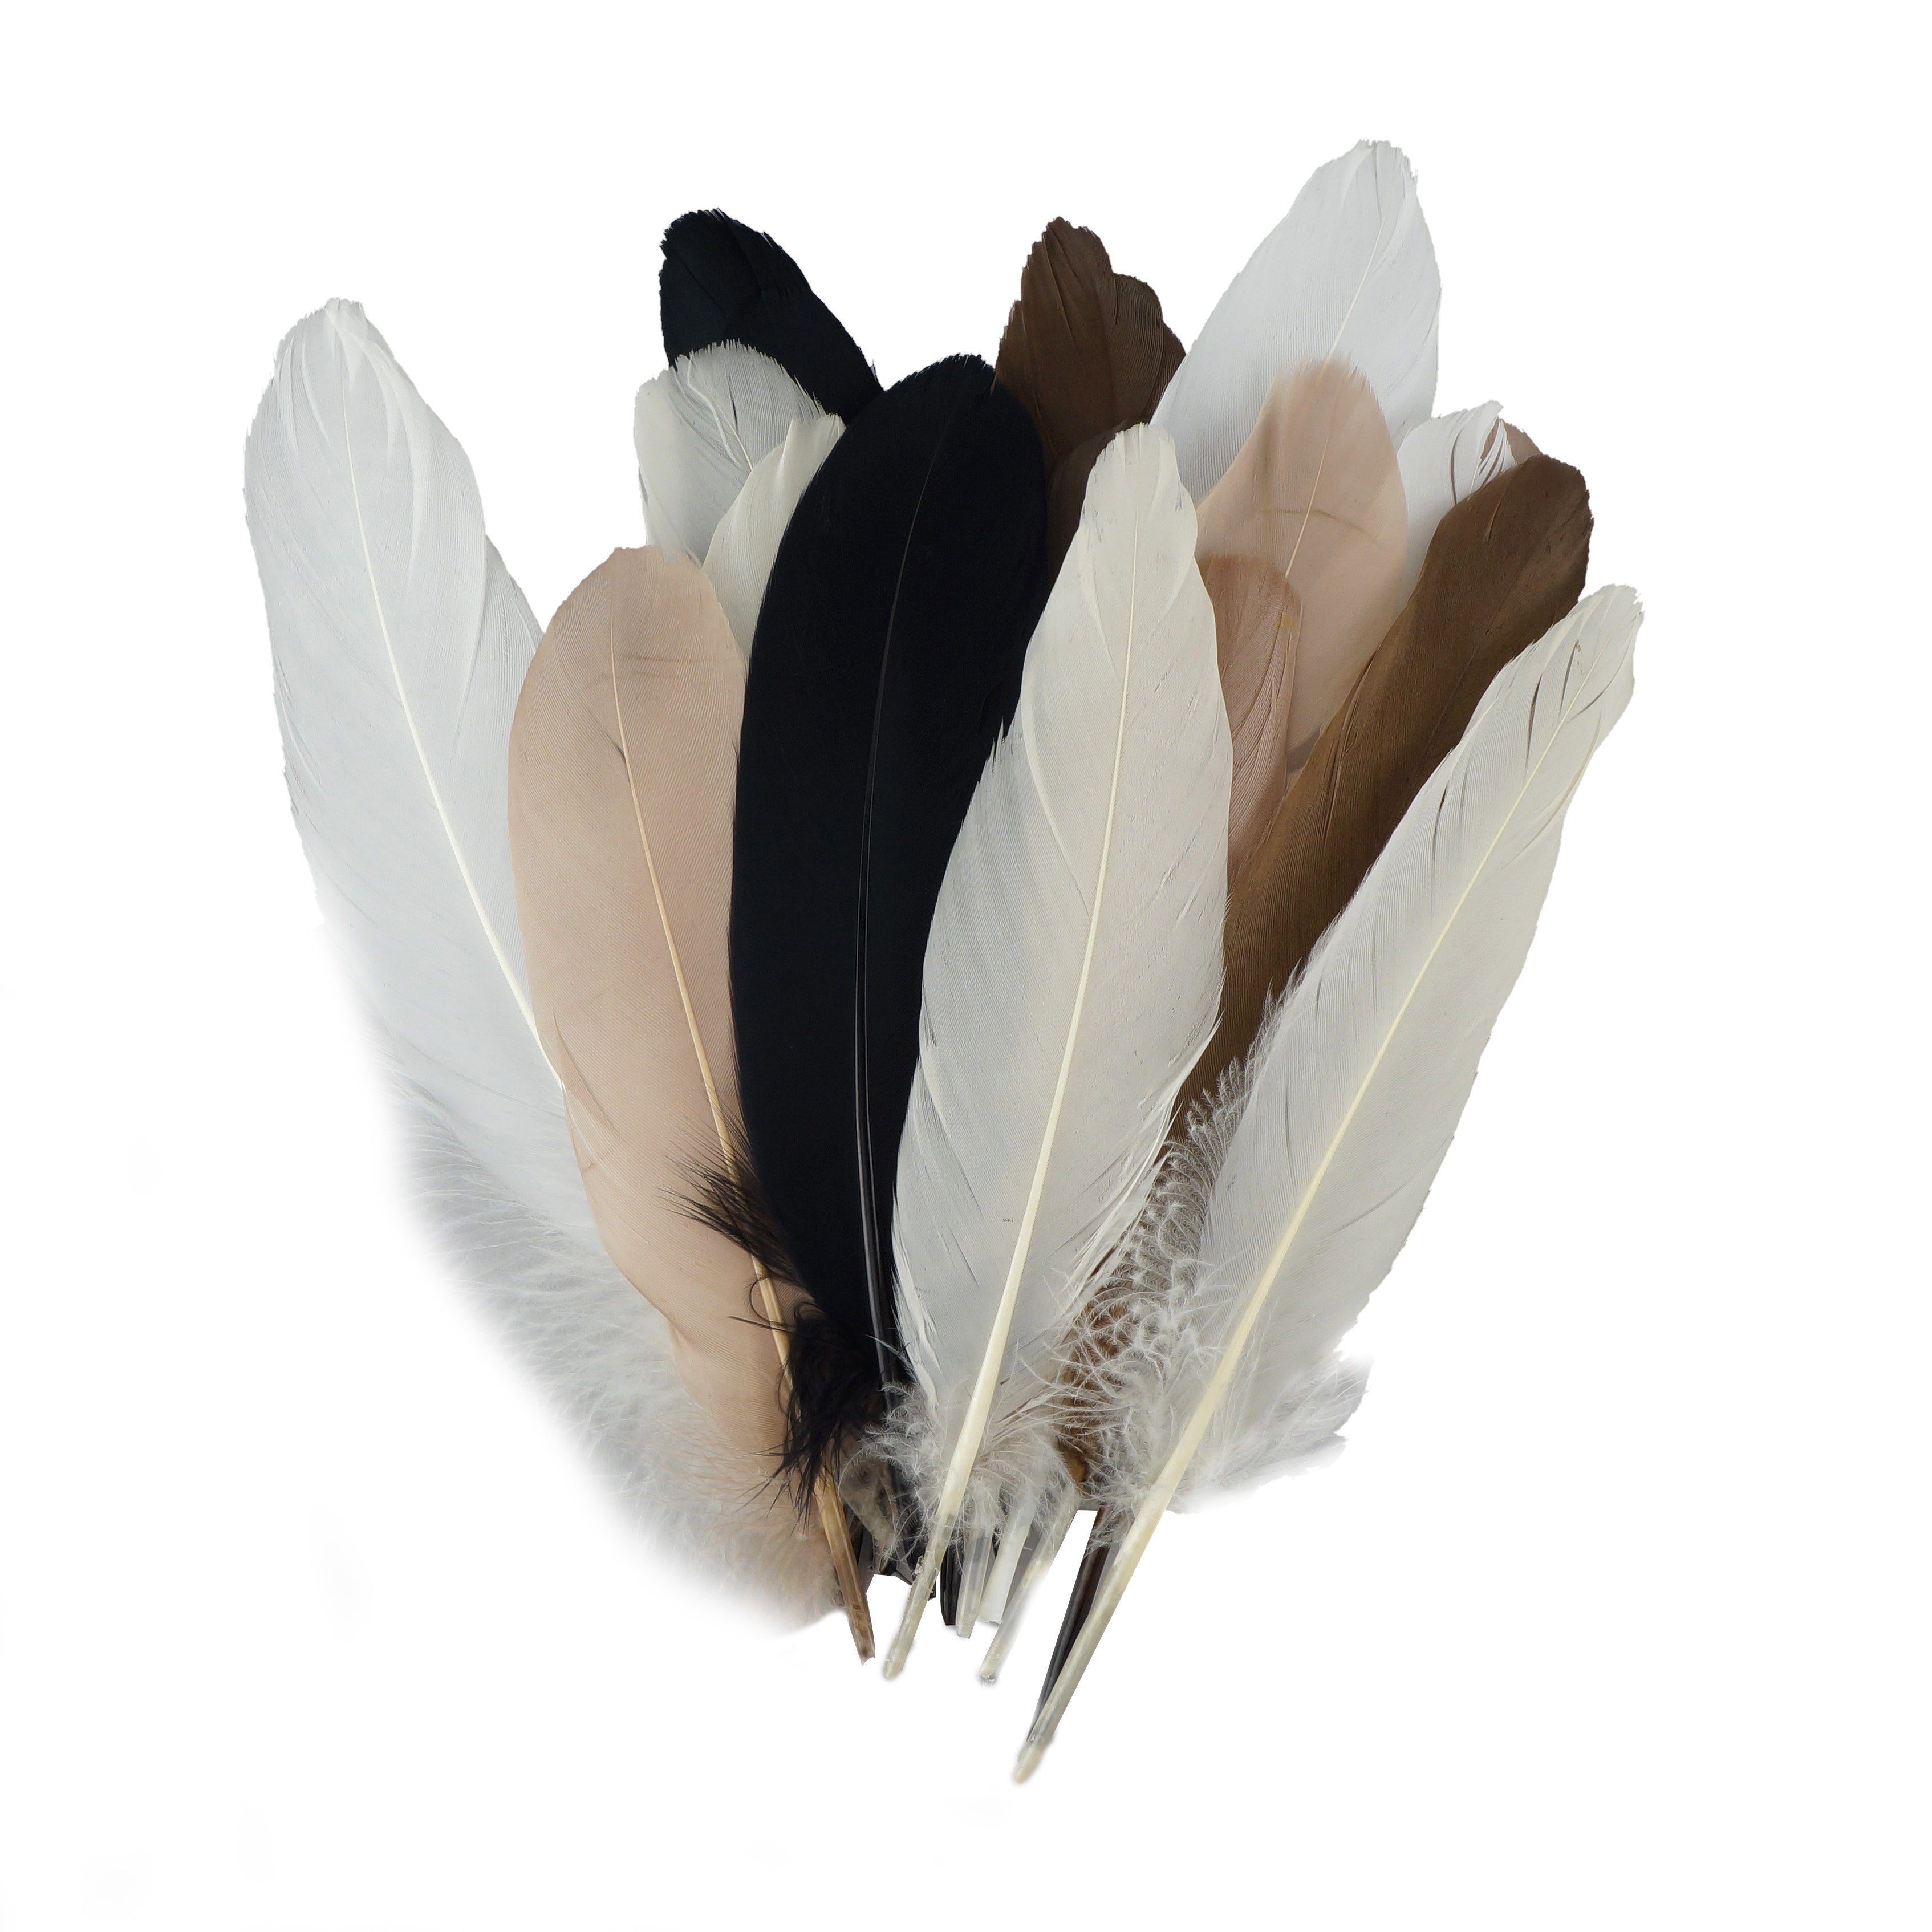  20 Pcs Hat Feathers, Assorted Feathers for Hats